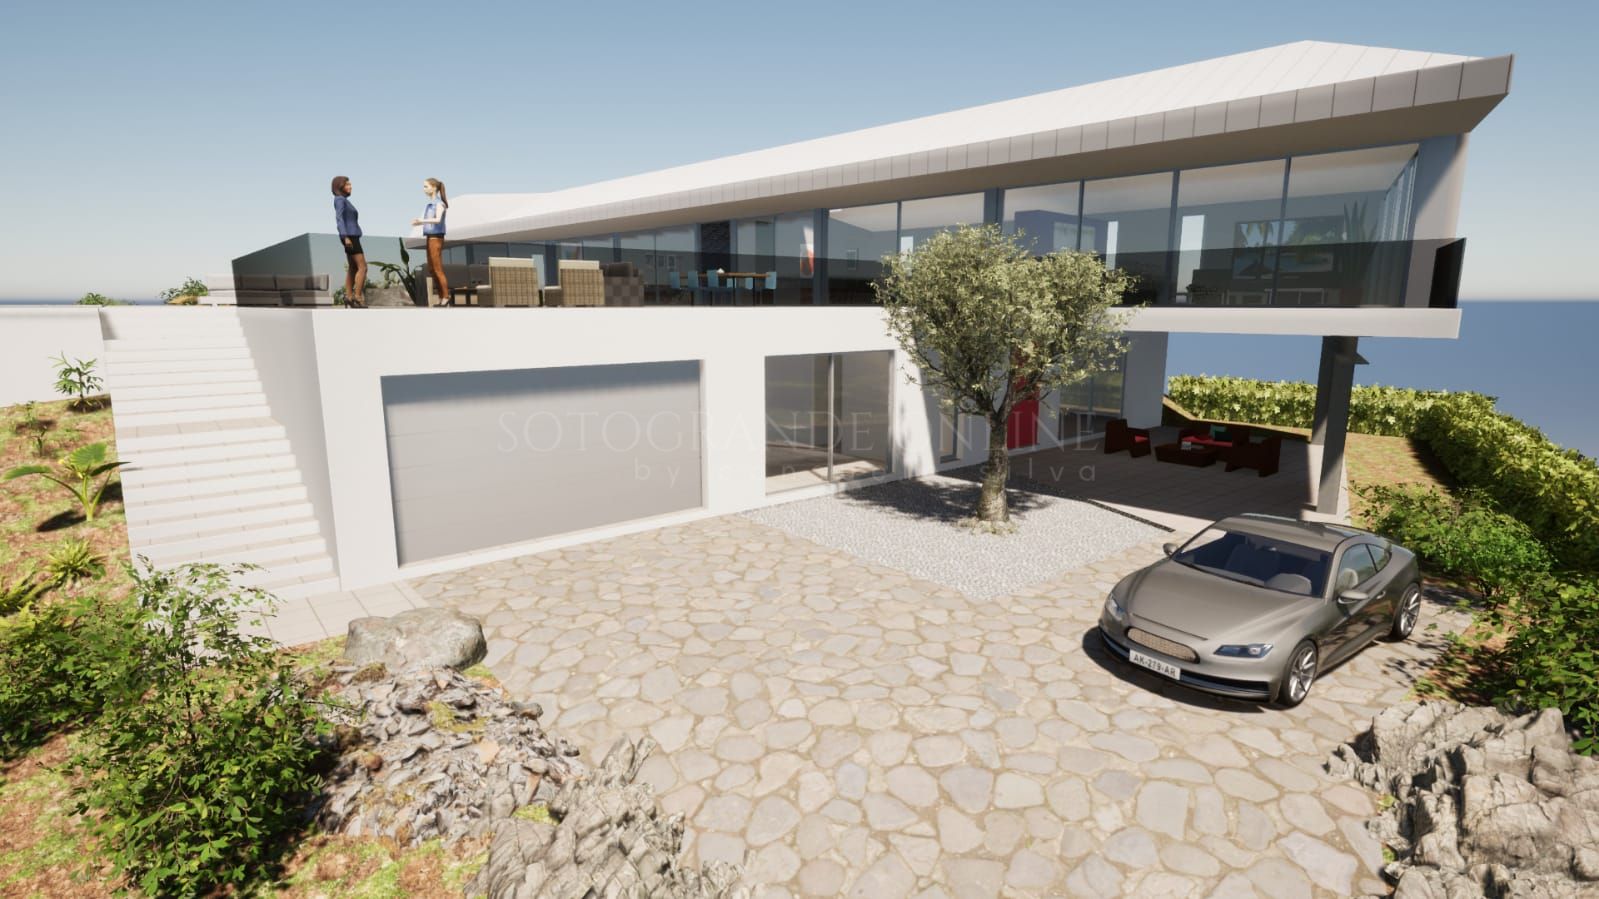 Spectacular new villa project, works started